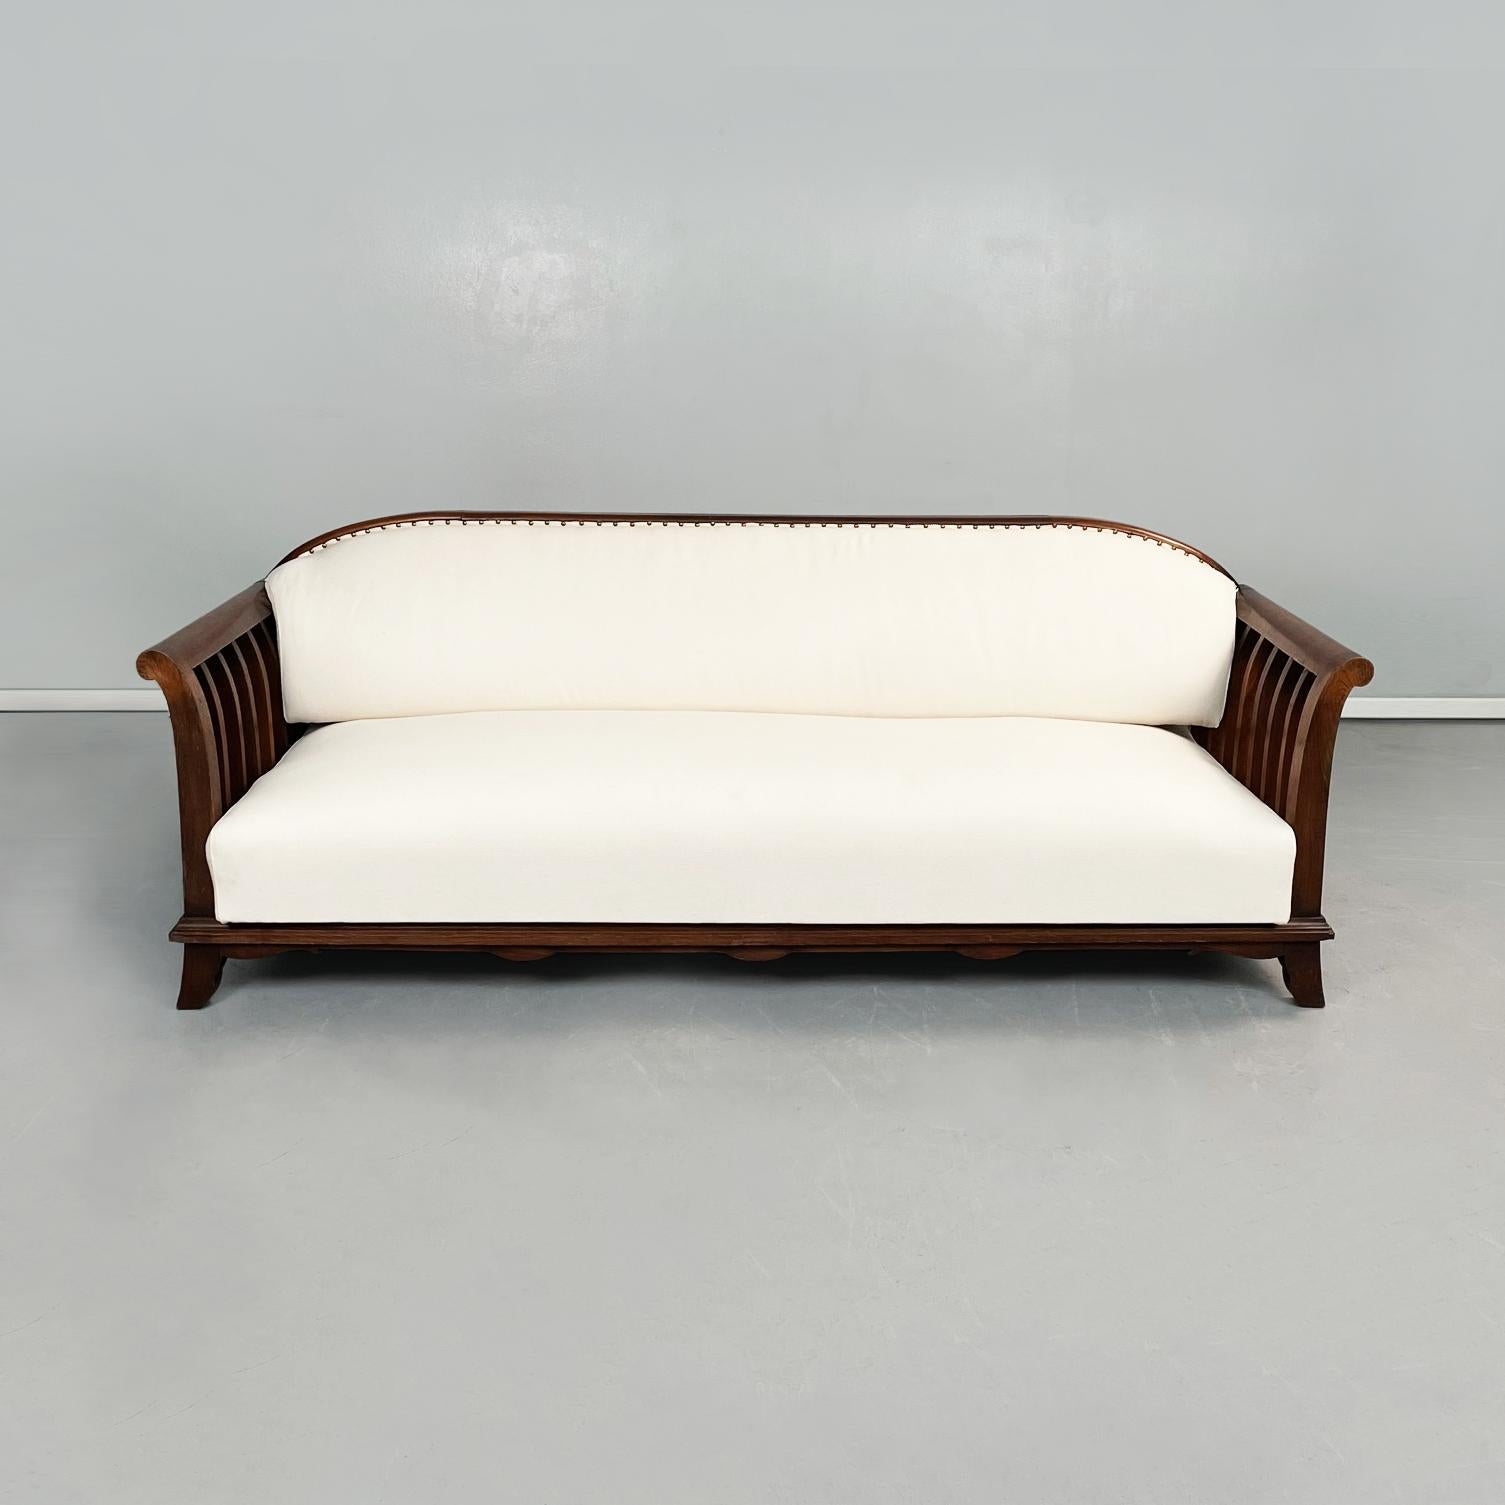 Italian modern Wooden sofa with white fabric, 1940s
A sofa with wooden structure. The sofa has a rectangular seat and a rectangular backrest with rounded upper corners, both padded and upholstered in white fabric. The wooden armrests are slightly